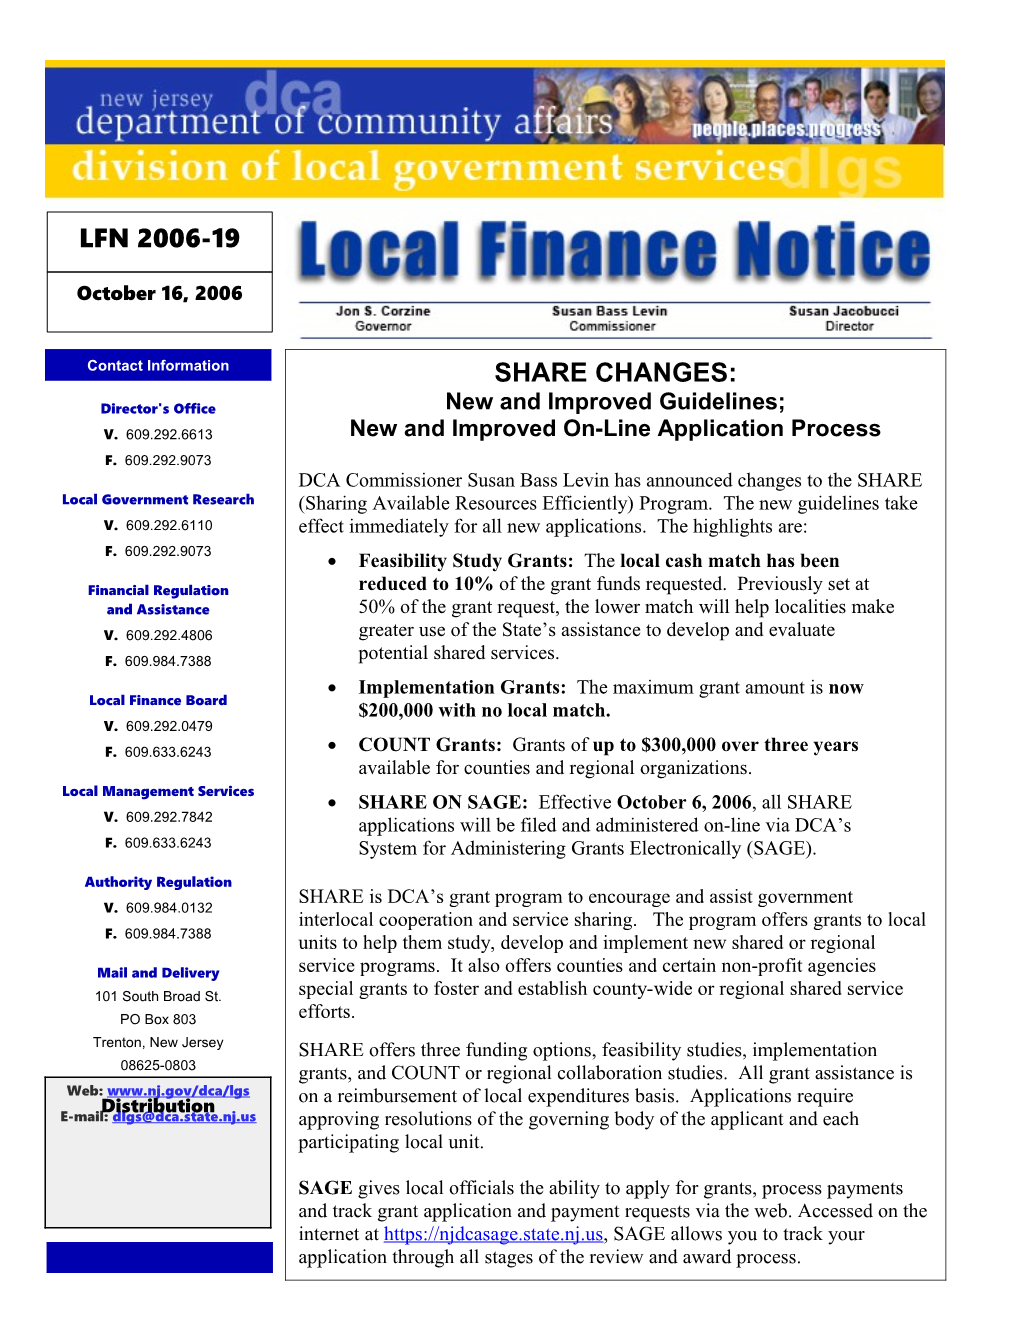 Local Finance Notice 2006-19October 16, 2006Page 1